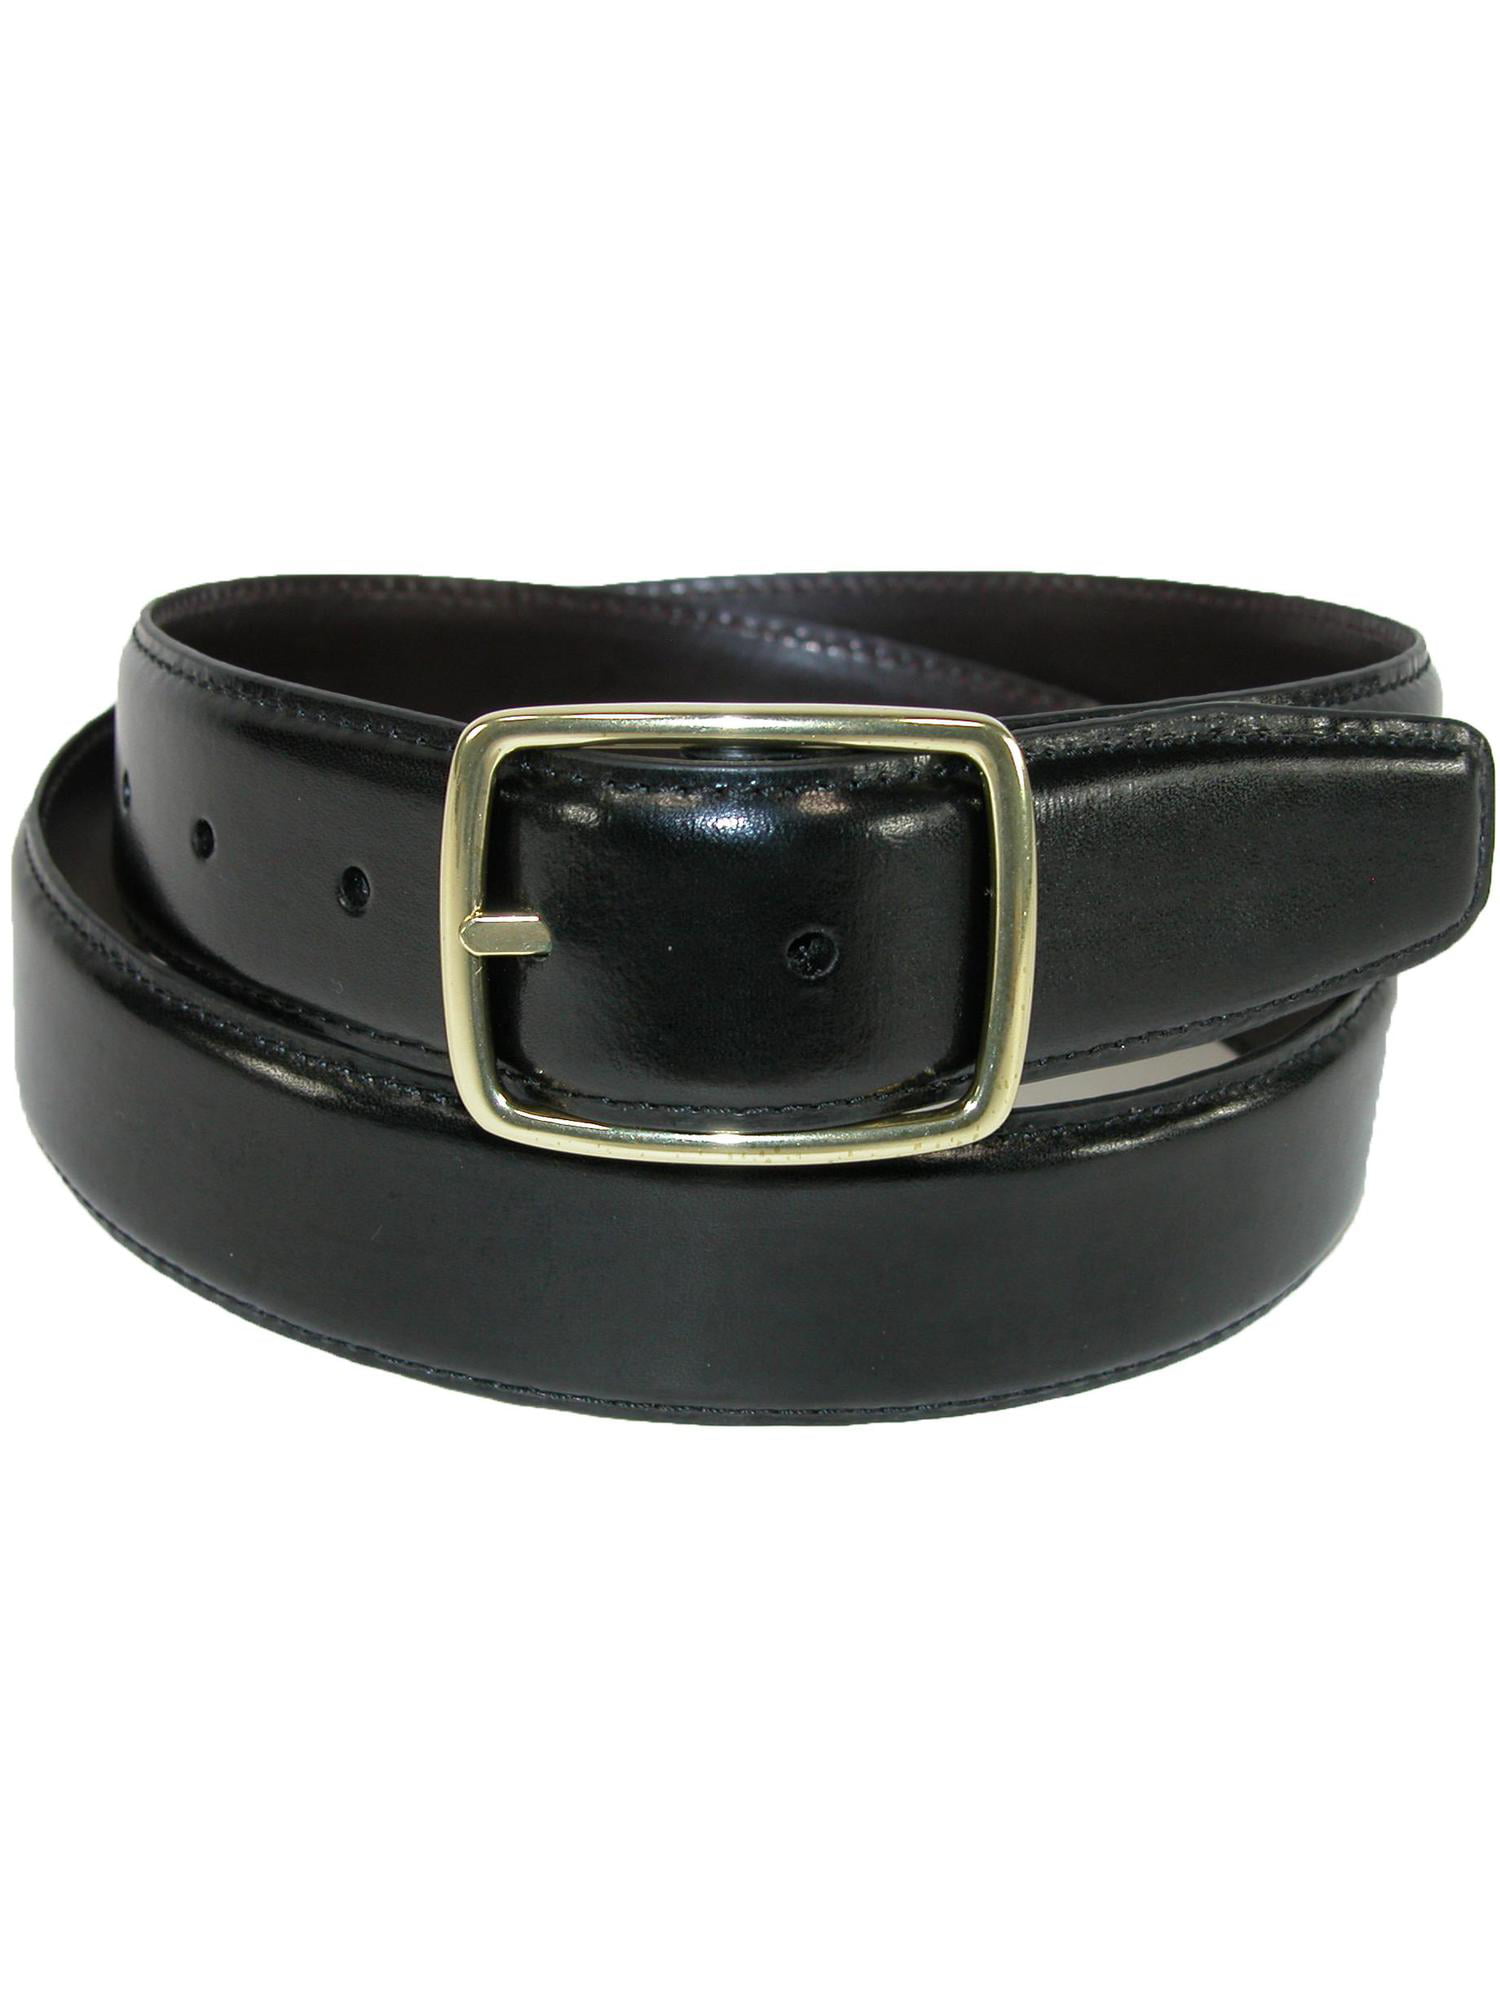 BLACK great for any occasion in Small! Mens Belt 